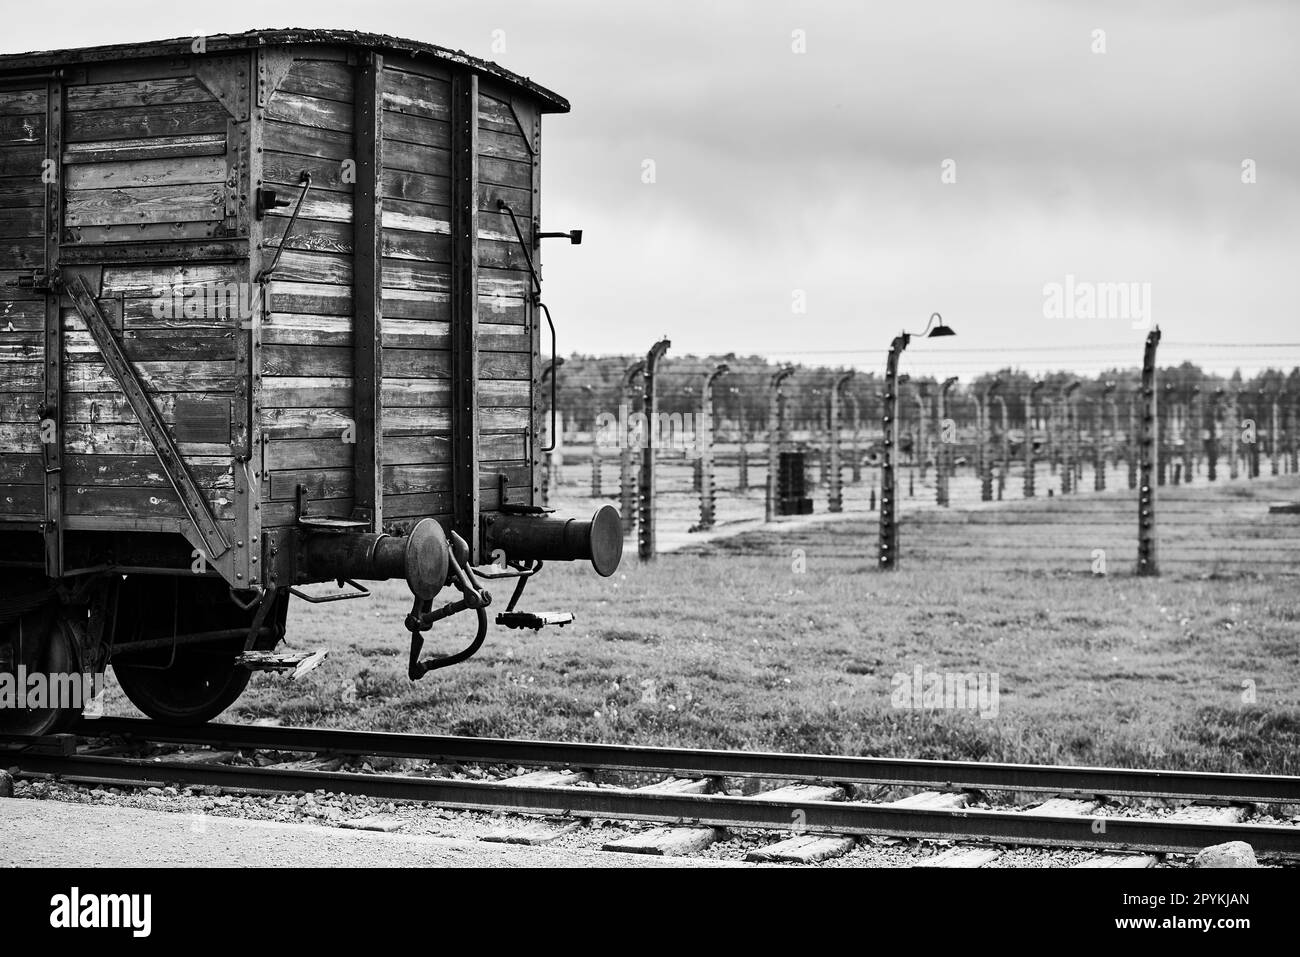 railway cars transporting prisoners to toconcentration camp in Poland from World War II Stock Photo